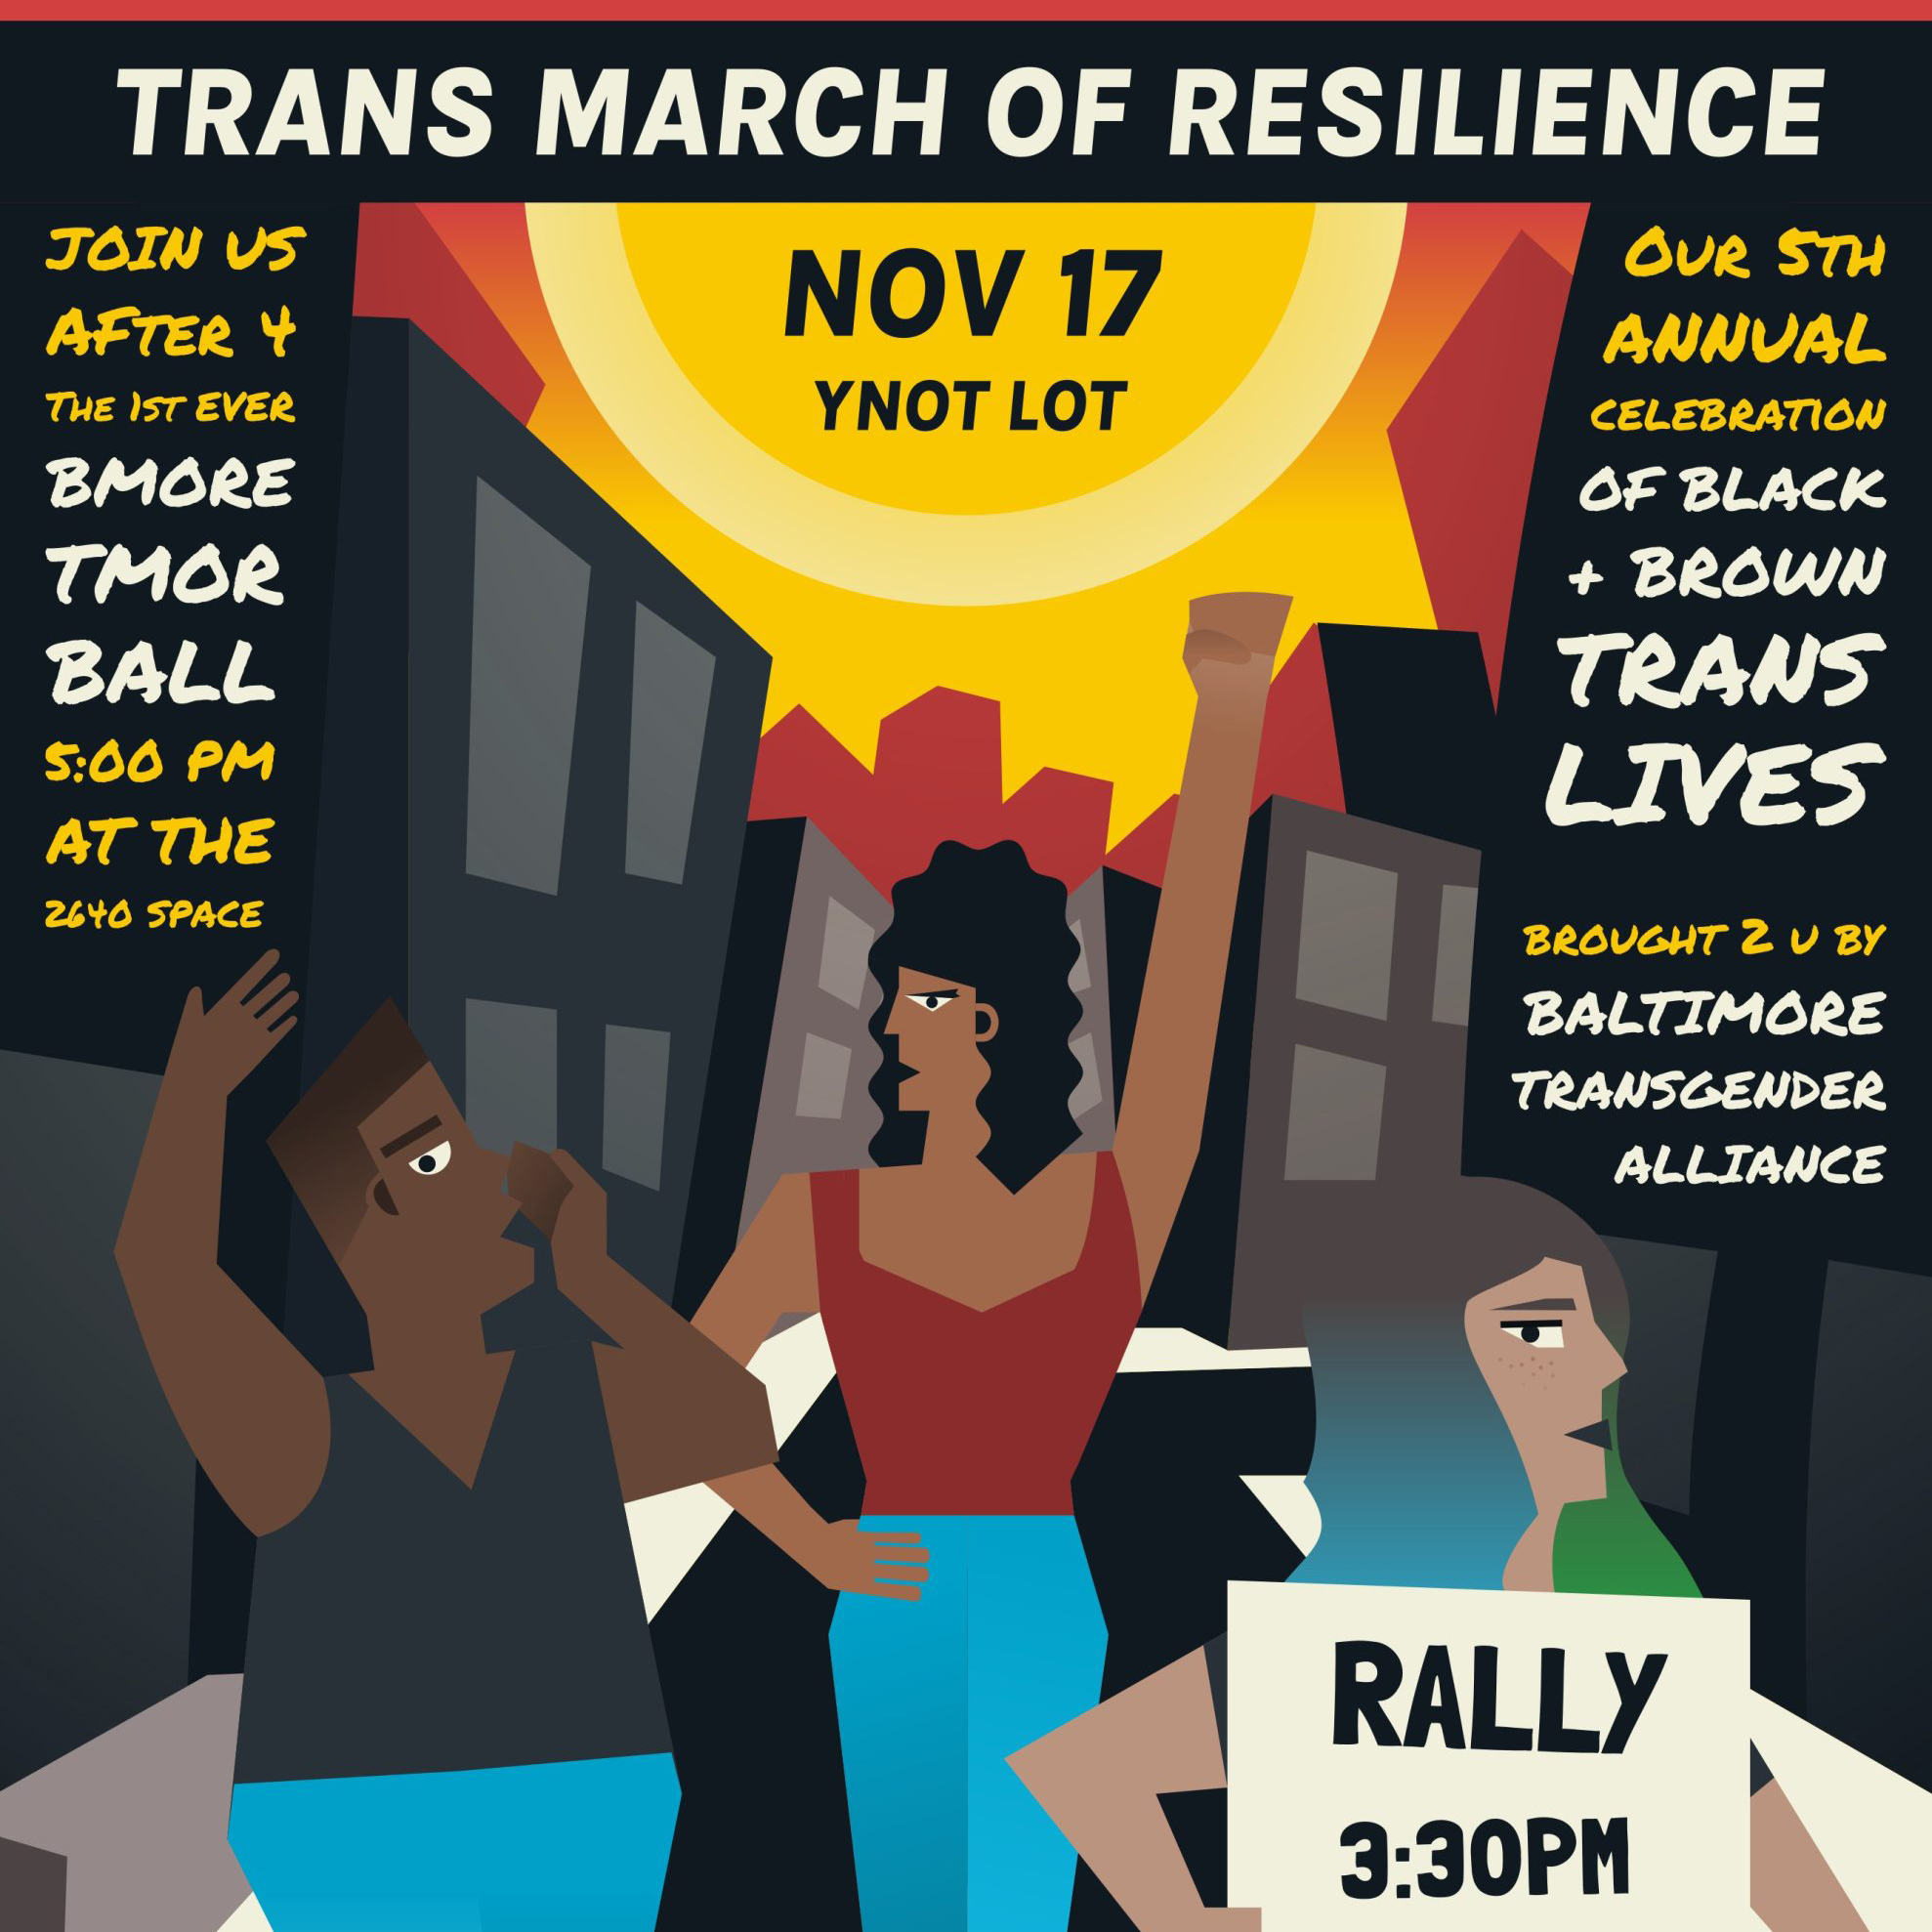 2019 trans march of resilience poster